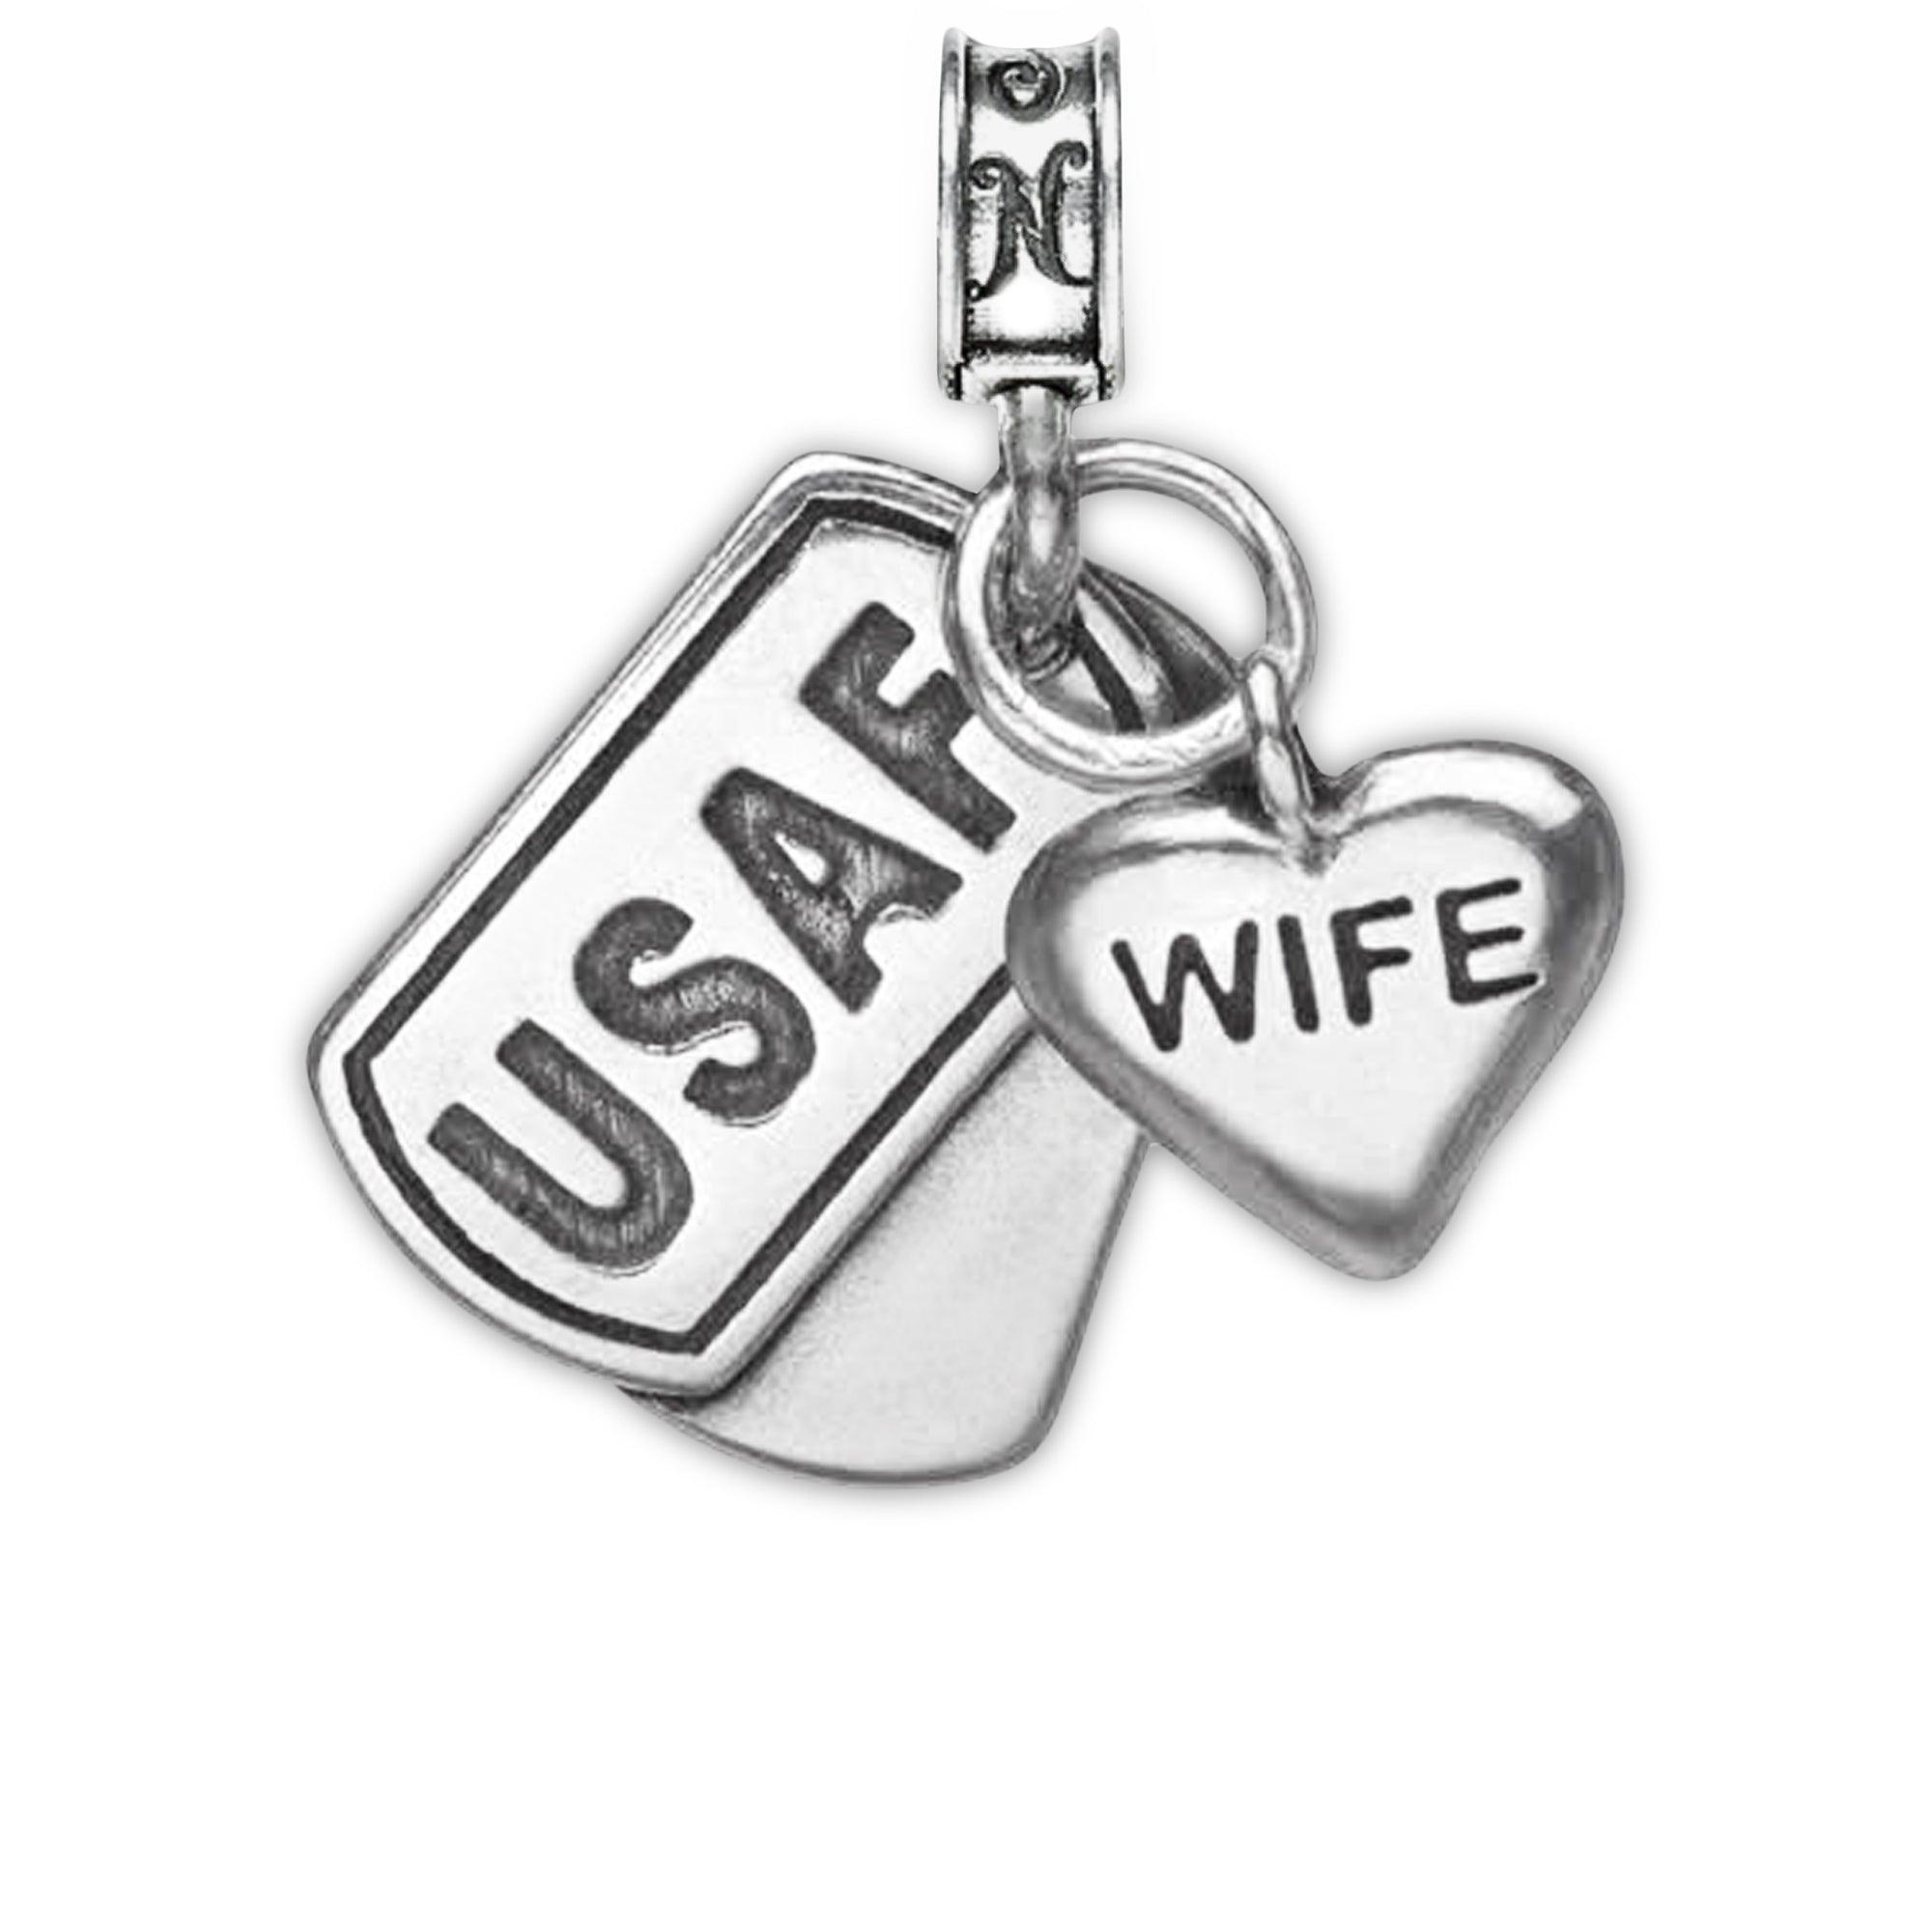 Military Jewelry, Military Charms, Military Gifts, USAF, United States Air Force, USAF Dog Tag, United States Air Force Dog Tag Air Force Wife